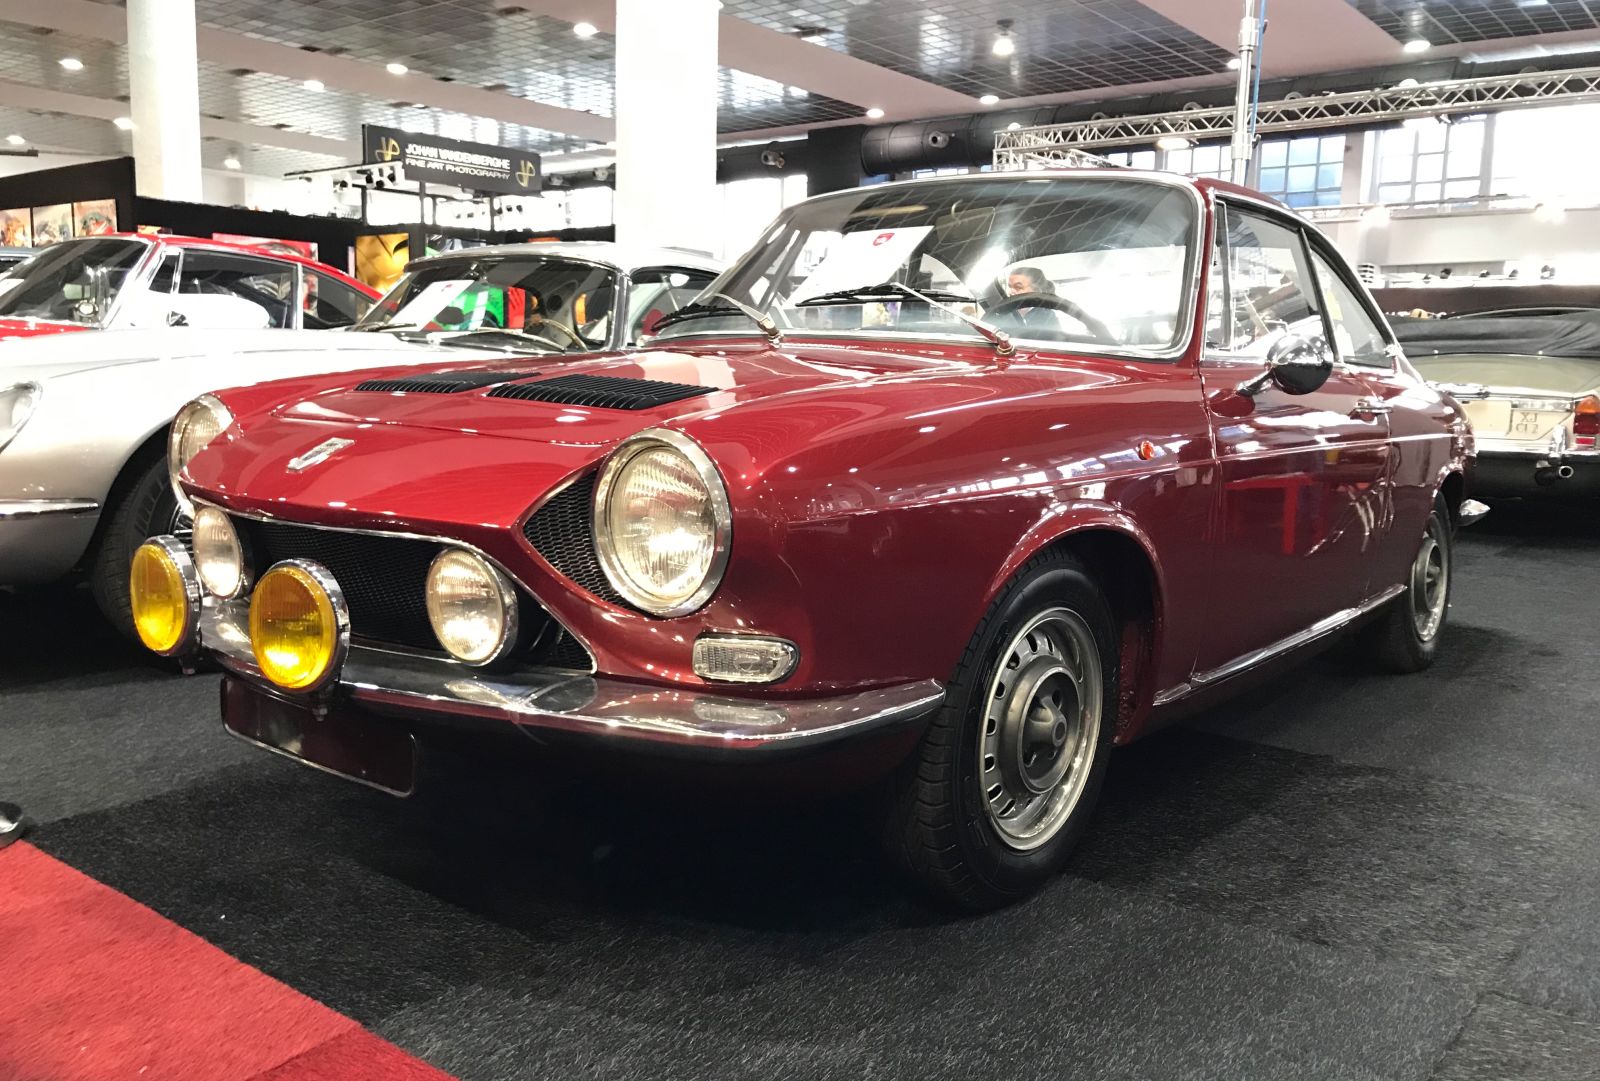 1968 SIMCA 1200S Bertone Coupé. These are too cool,